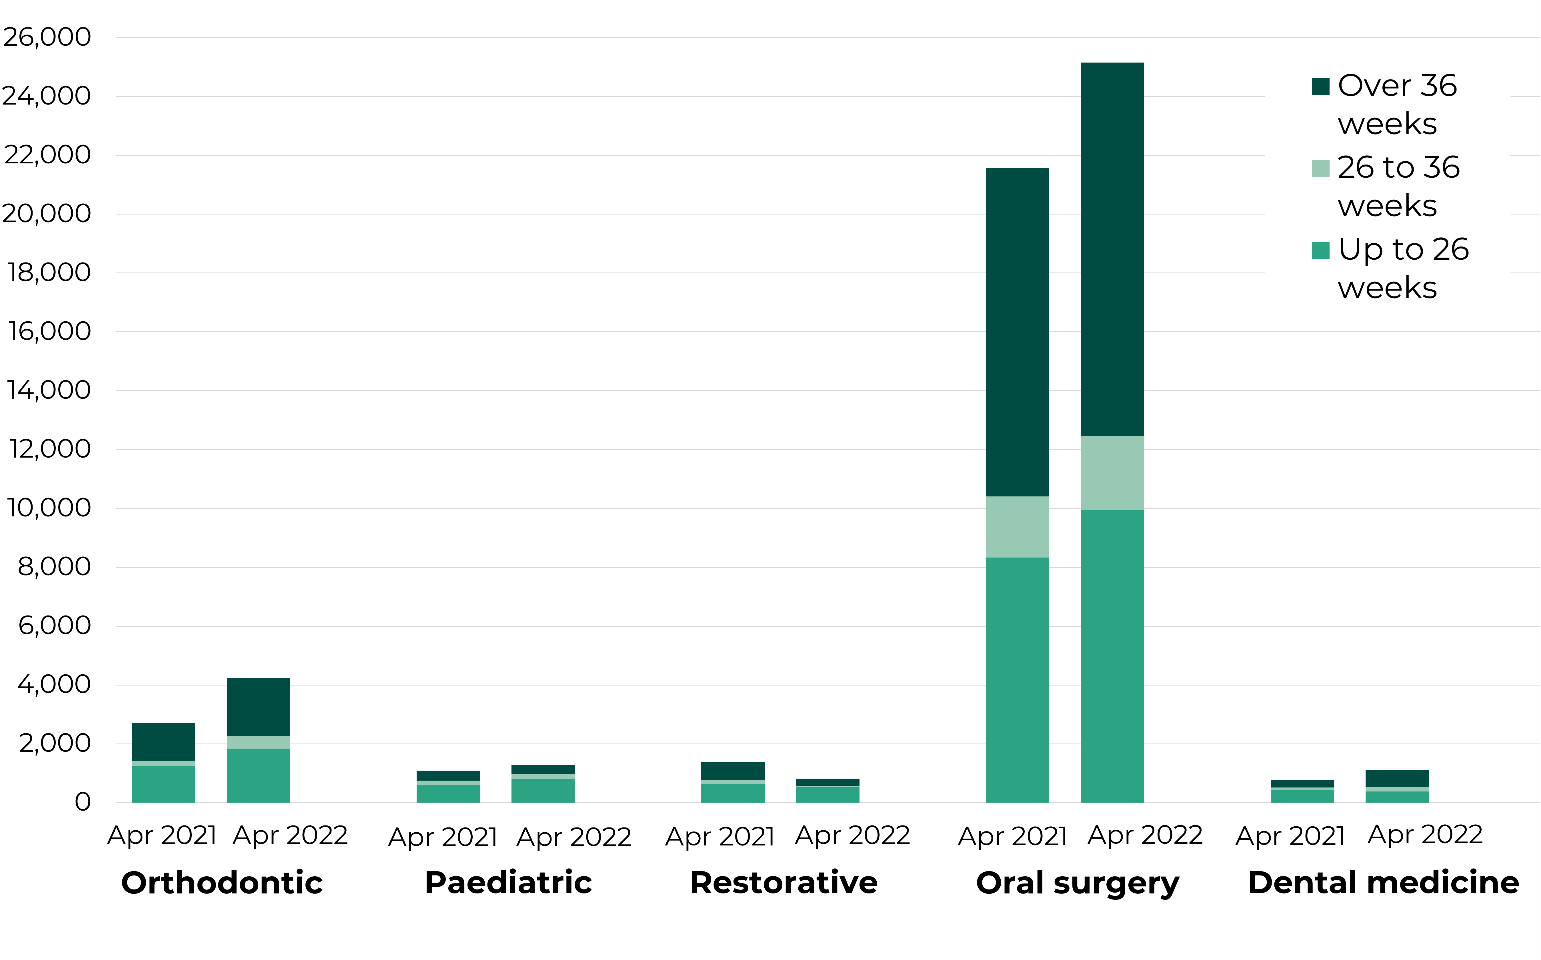 The content of this graphic is explained in the text.  There were more people waiting for orthodontic treatment (4,236) than pediatric dentistry (1,287) or restorative dentistry (823) in April 2022.